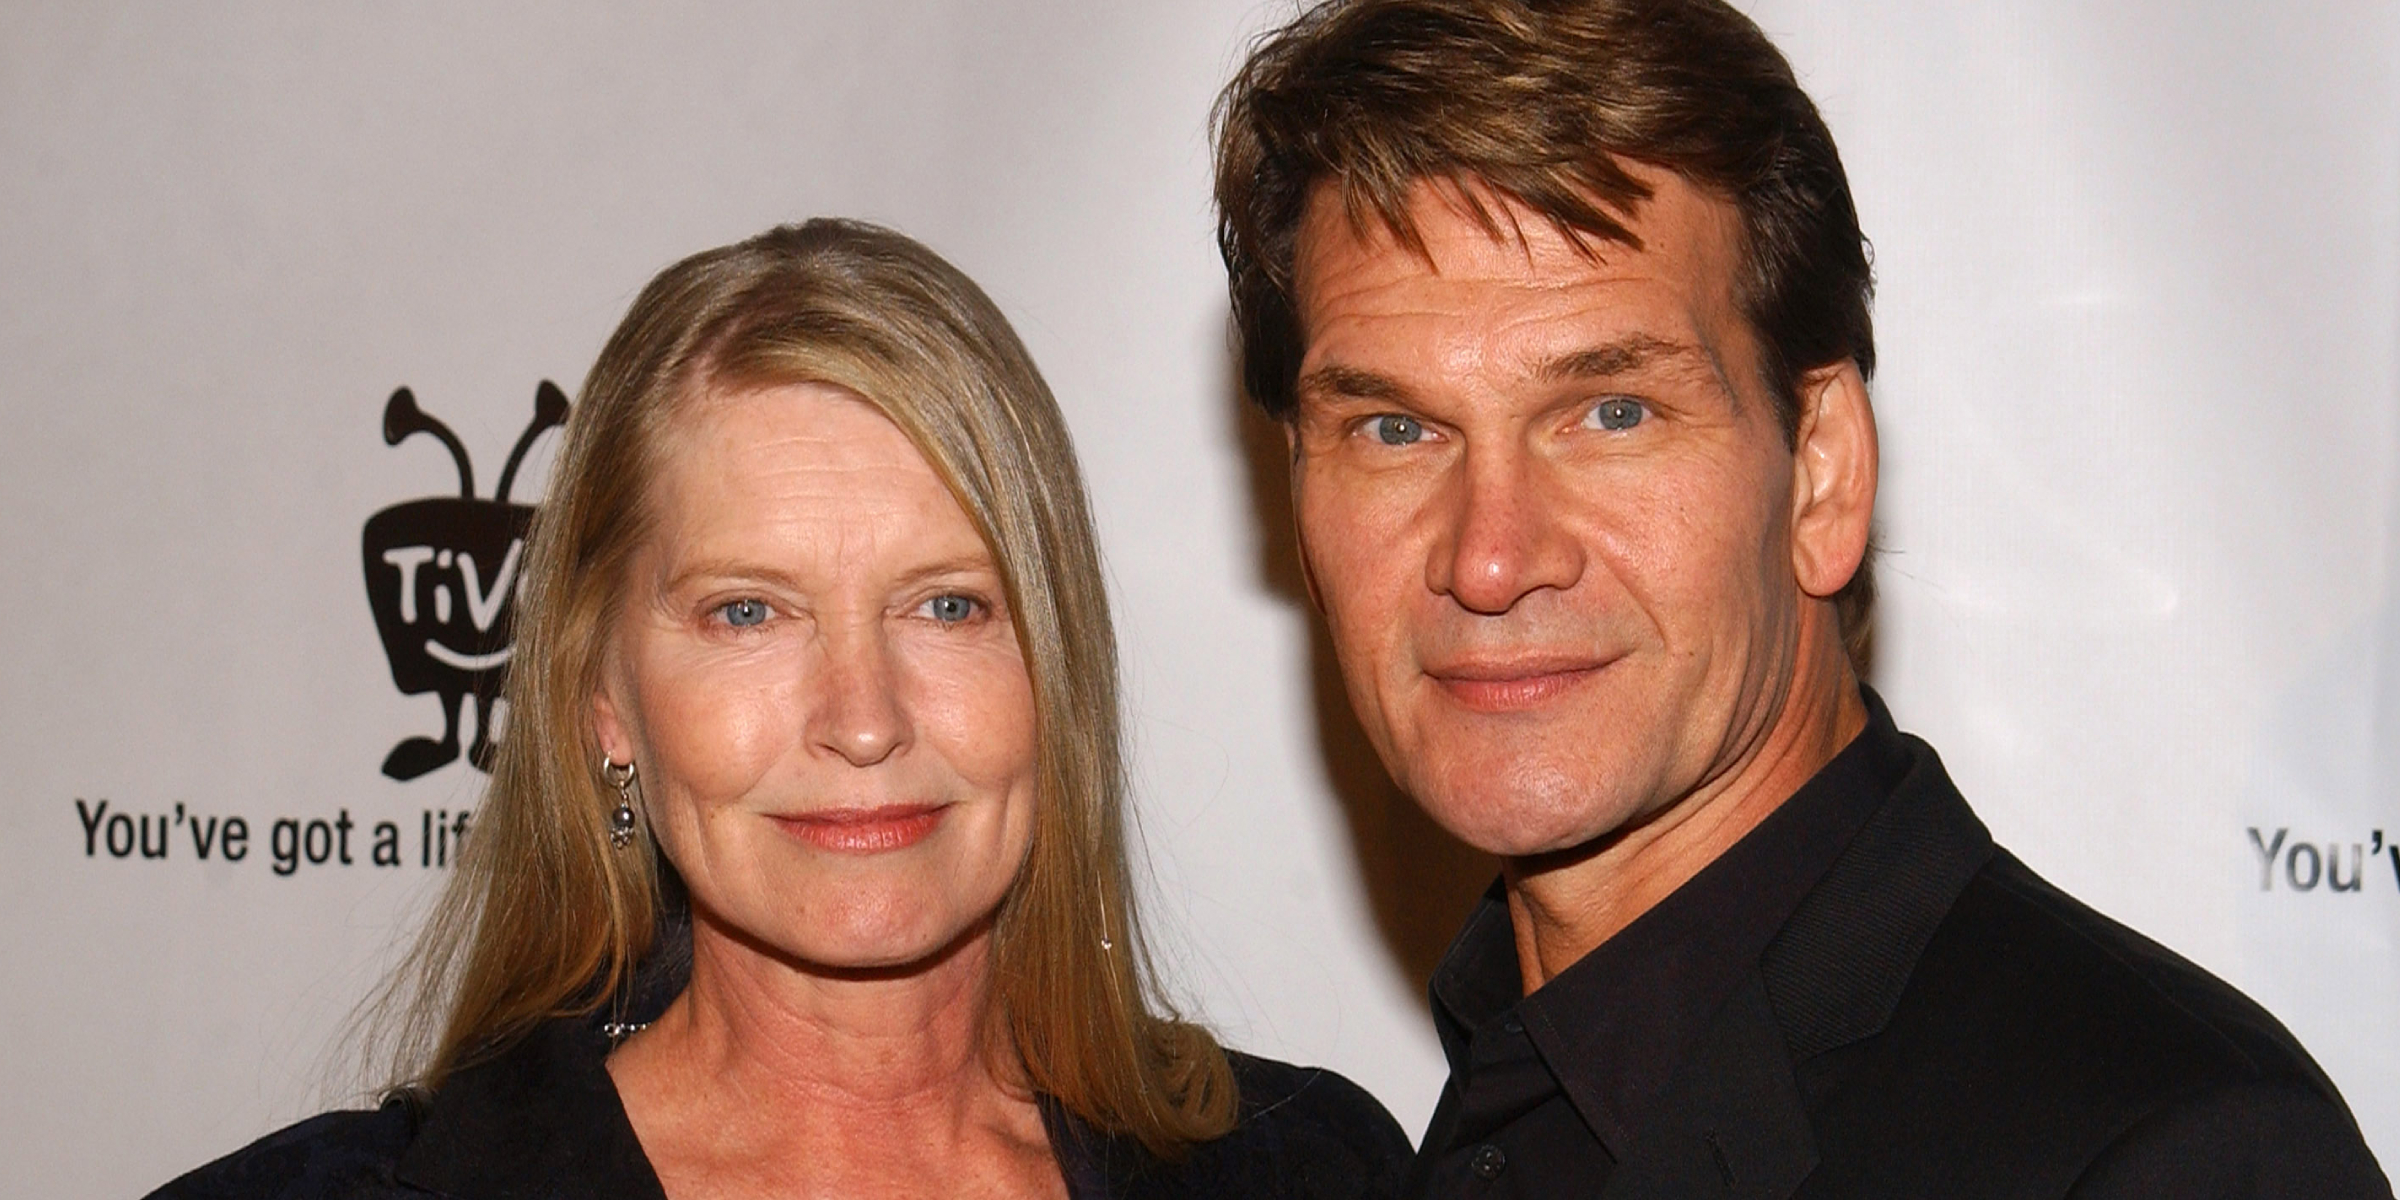 Patrick Swayze and Lisa Niemi | Source: Getty Images